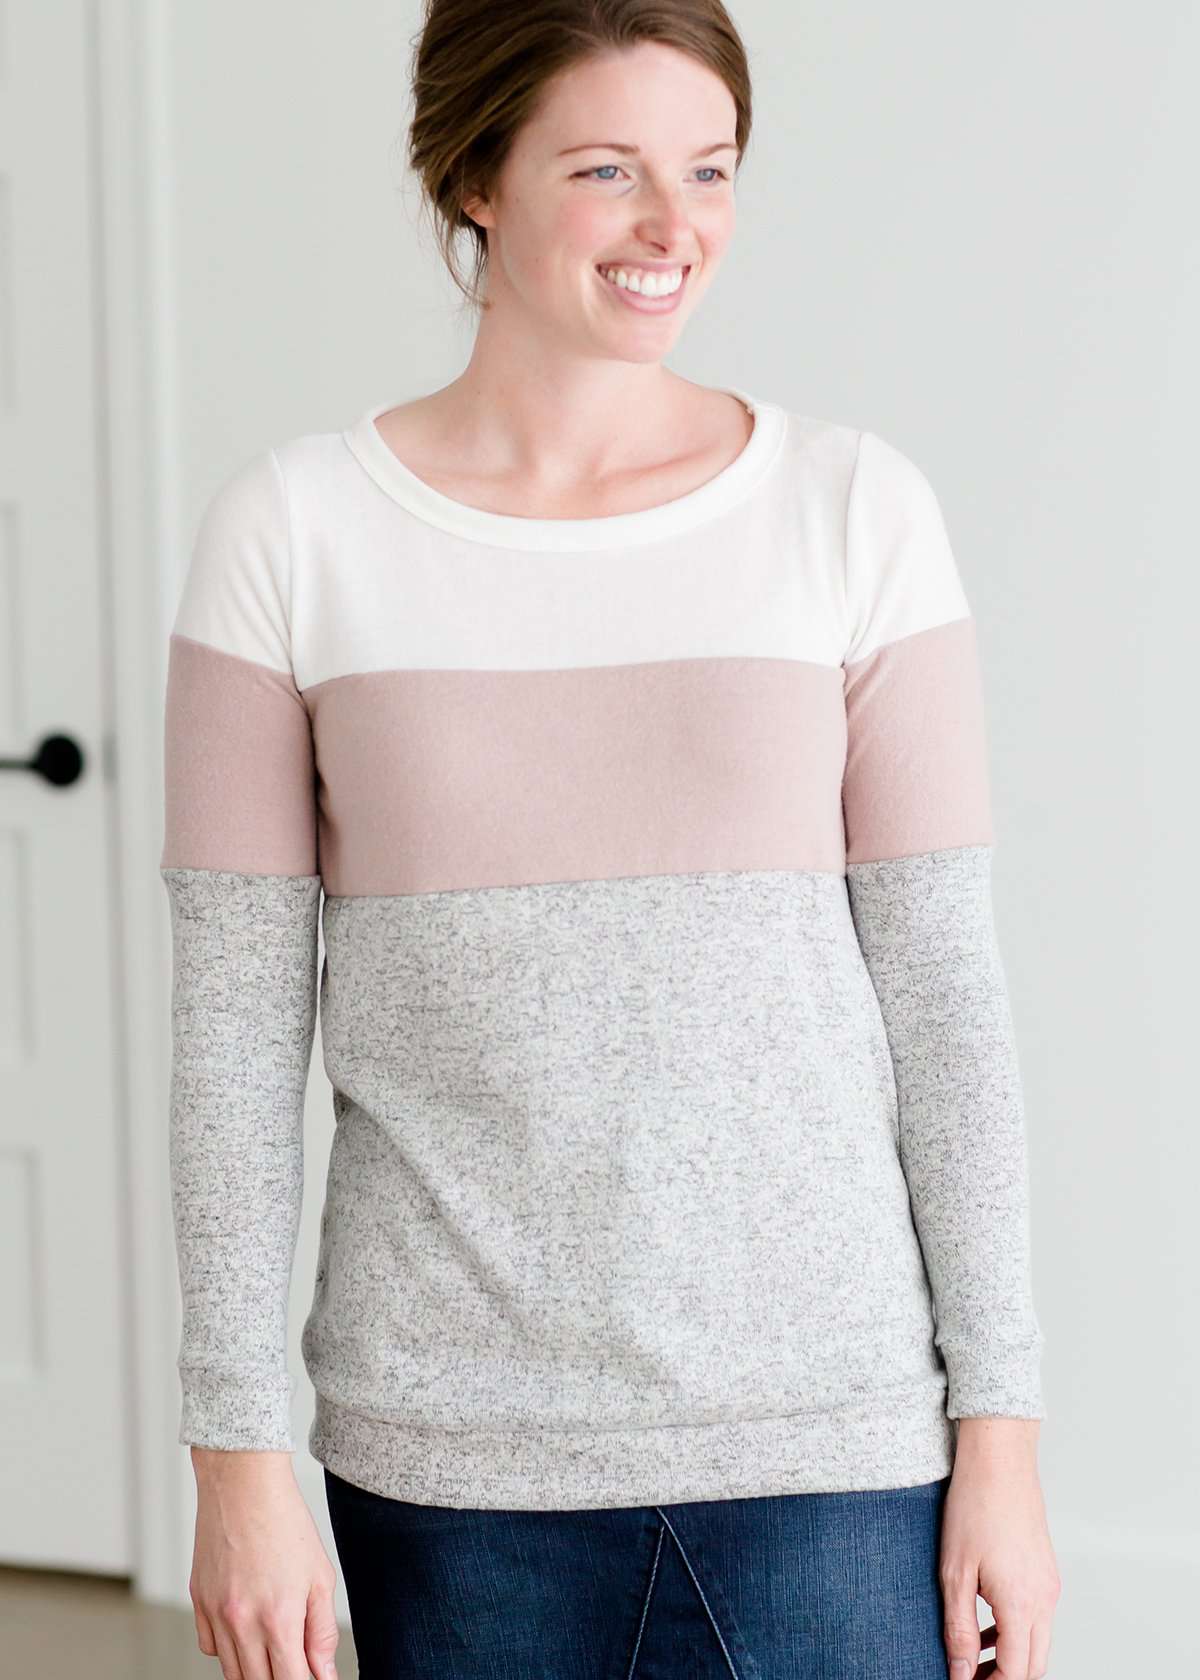 woman wearing a modest, soft sweater that is color blocked with white, mauve and gray.